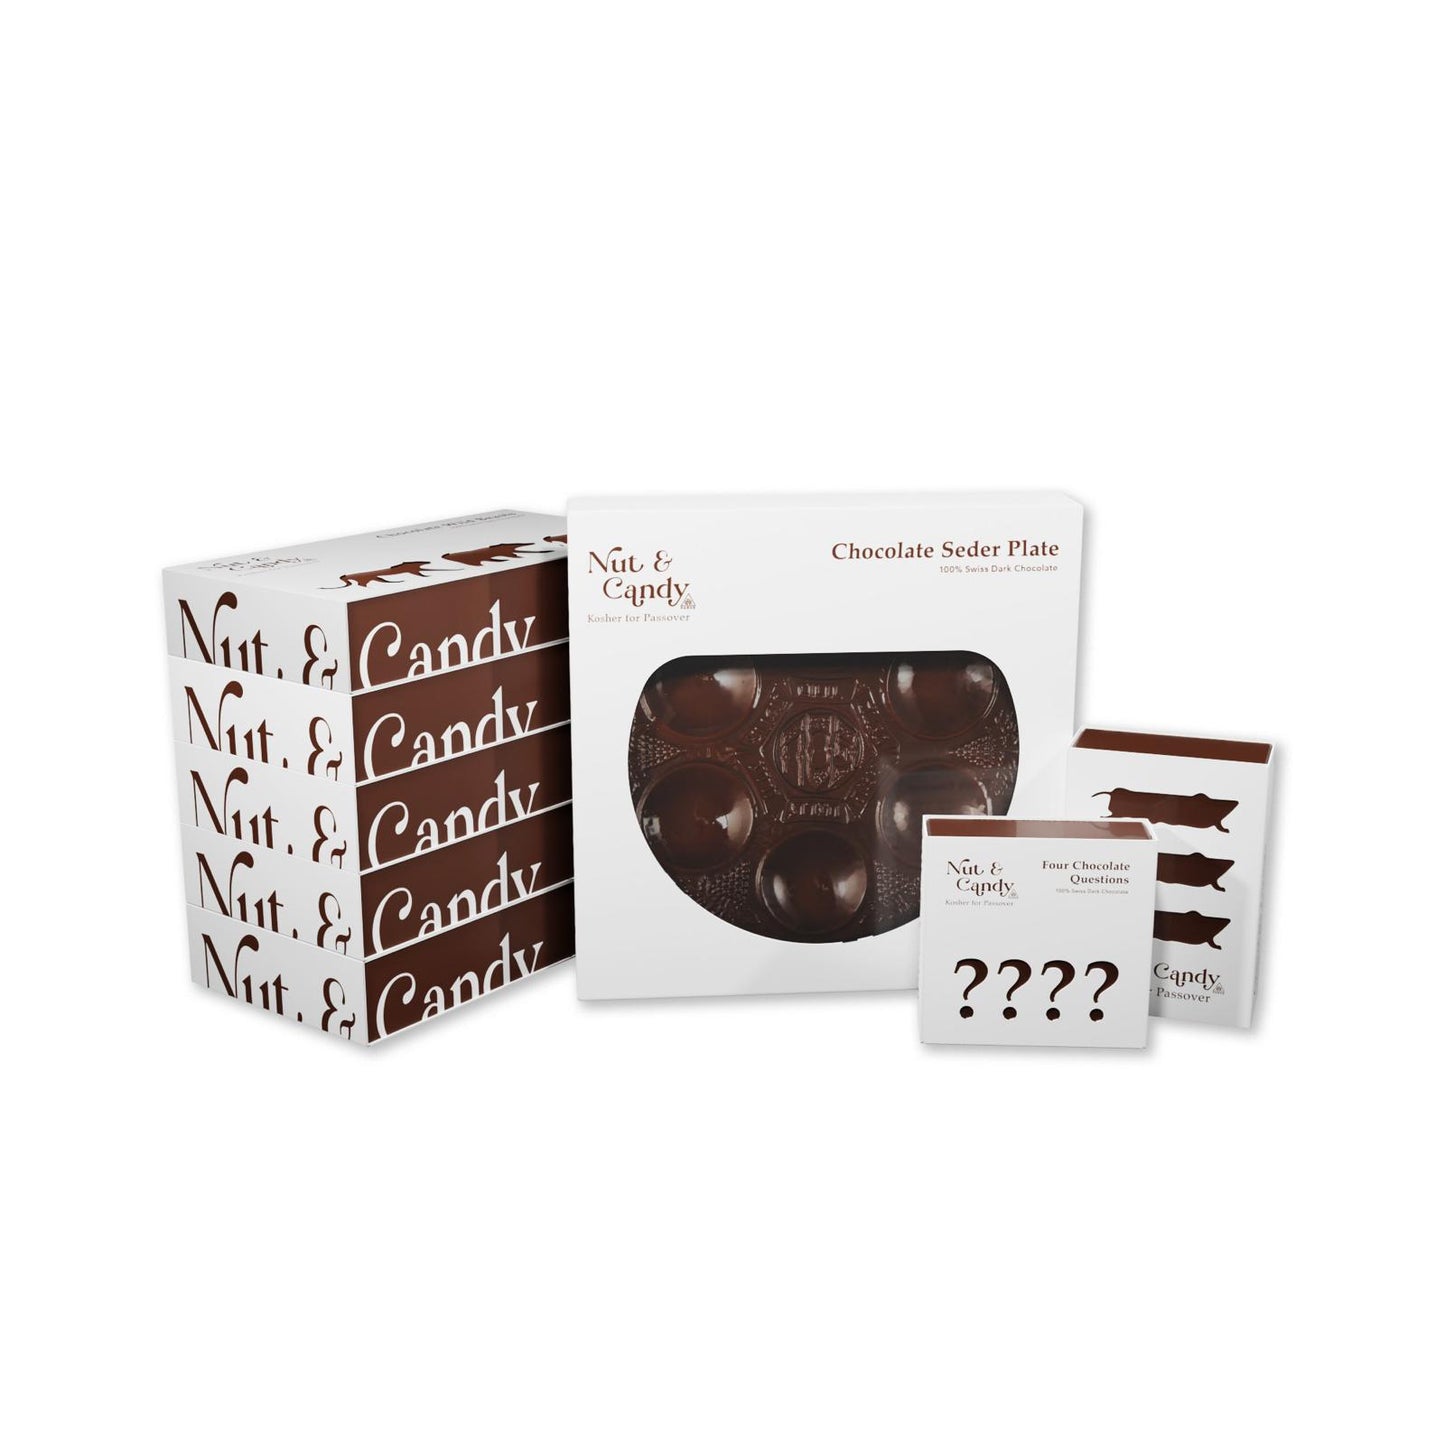 Complete Chocolate Seder Set | Kosher for Passover